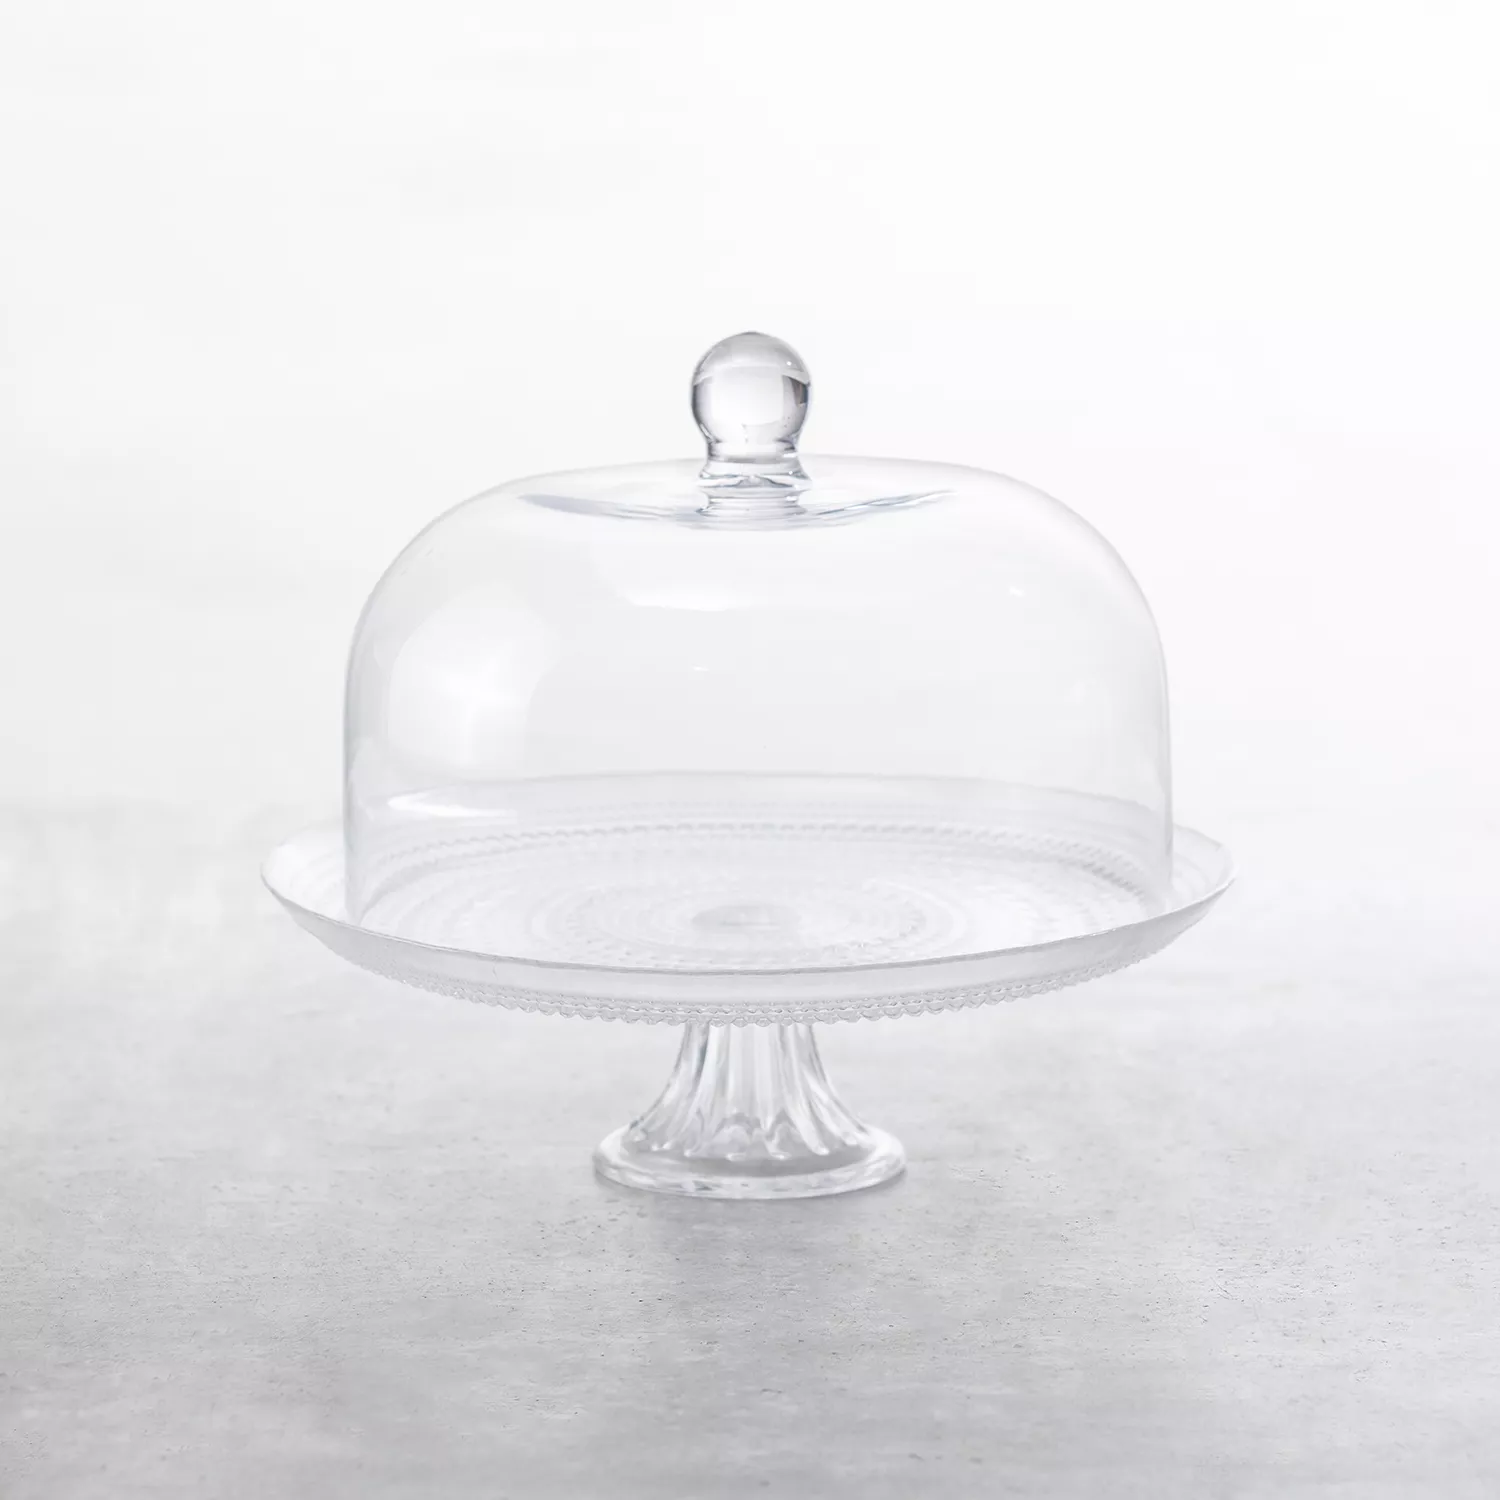 Modern Brown Wooden and Glass Dome Cake Stand - WallMantra